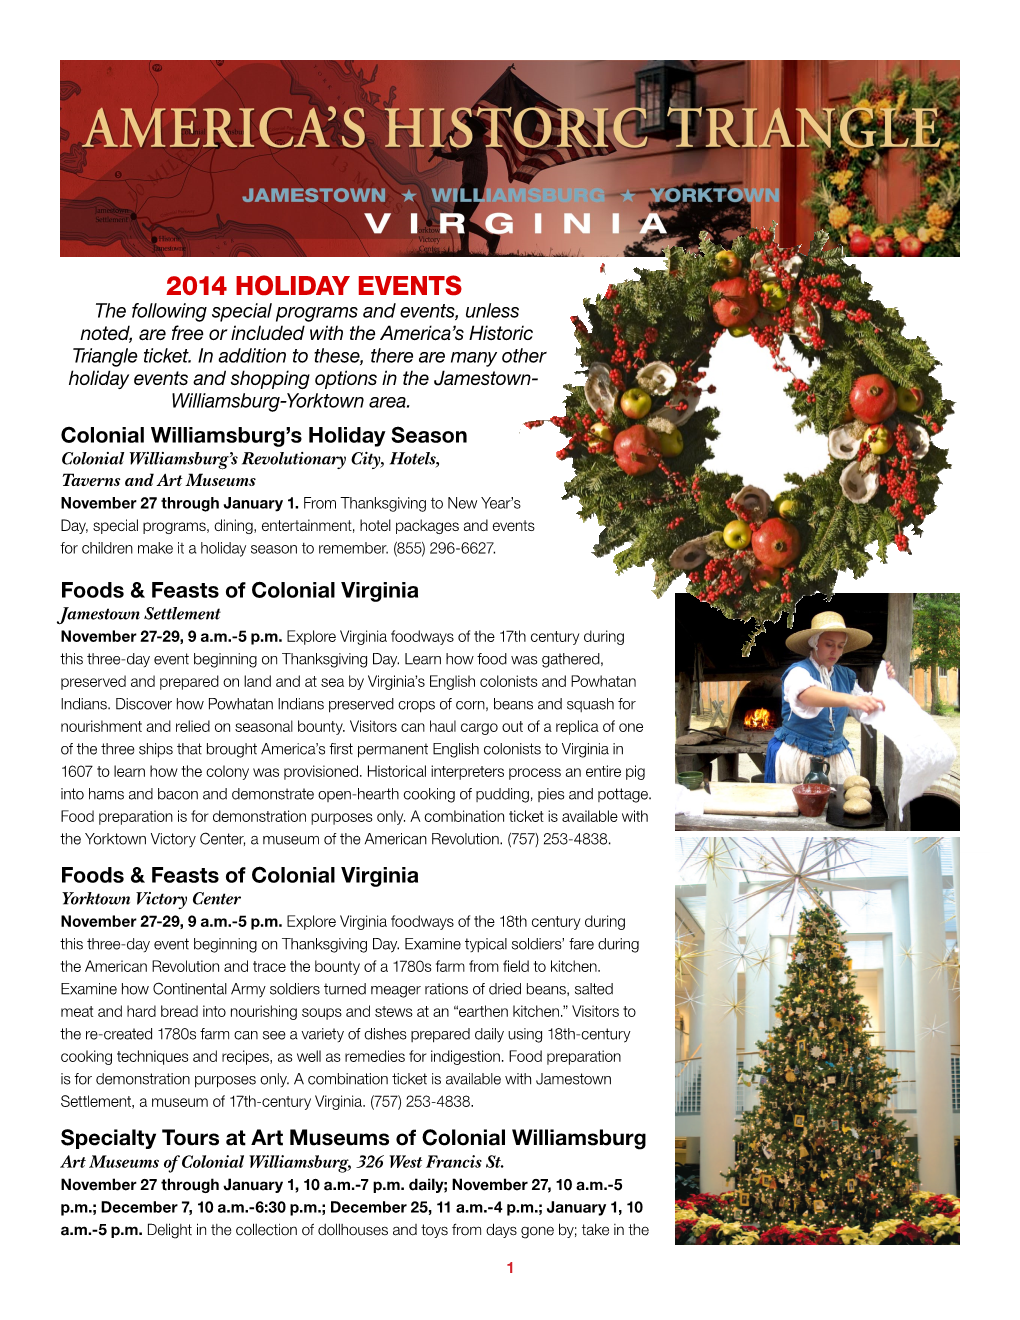 HOLIDAY EVENTS the Following Special Programs and Events, Unless Noted, Are Free Or Included with the America’S Historic Triangle Ticket